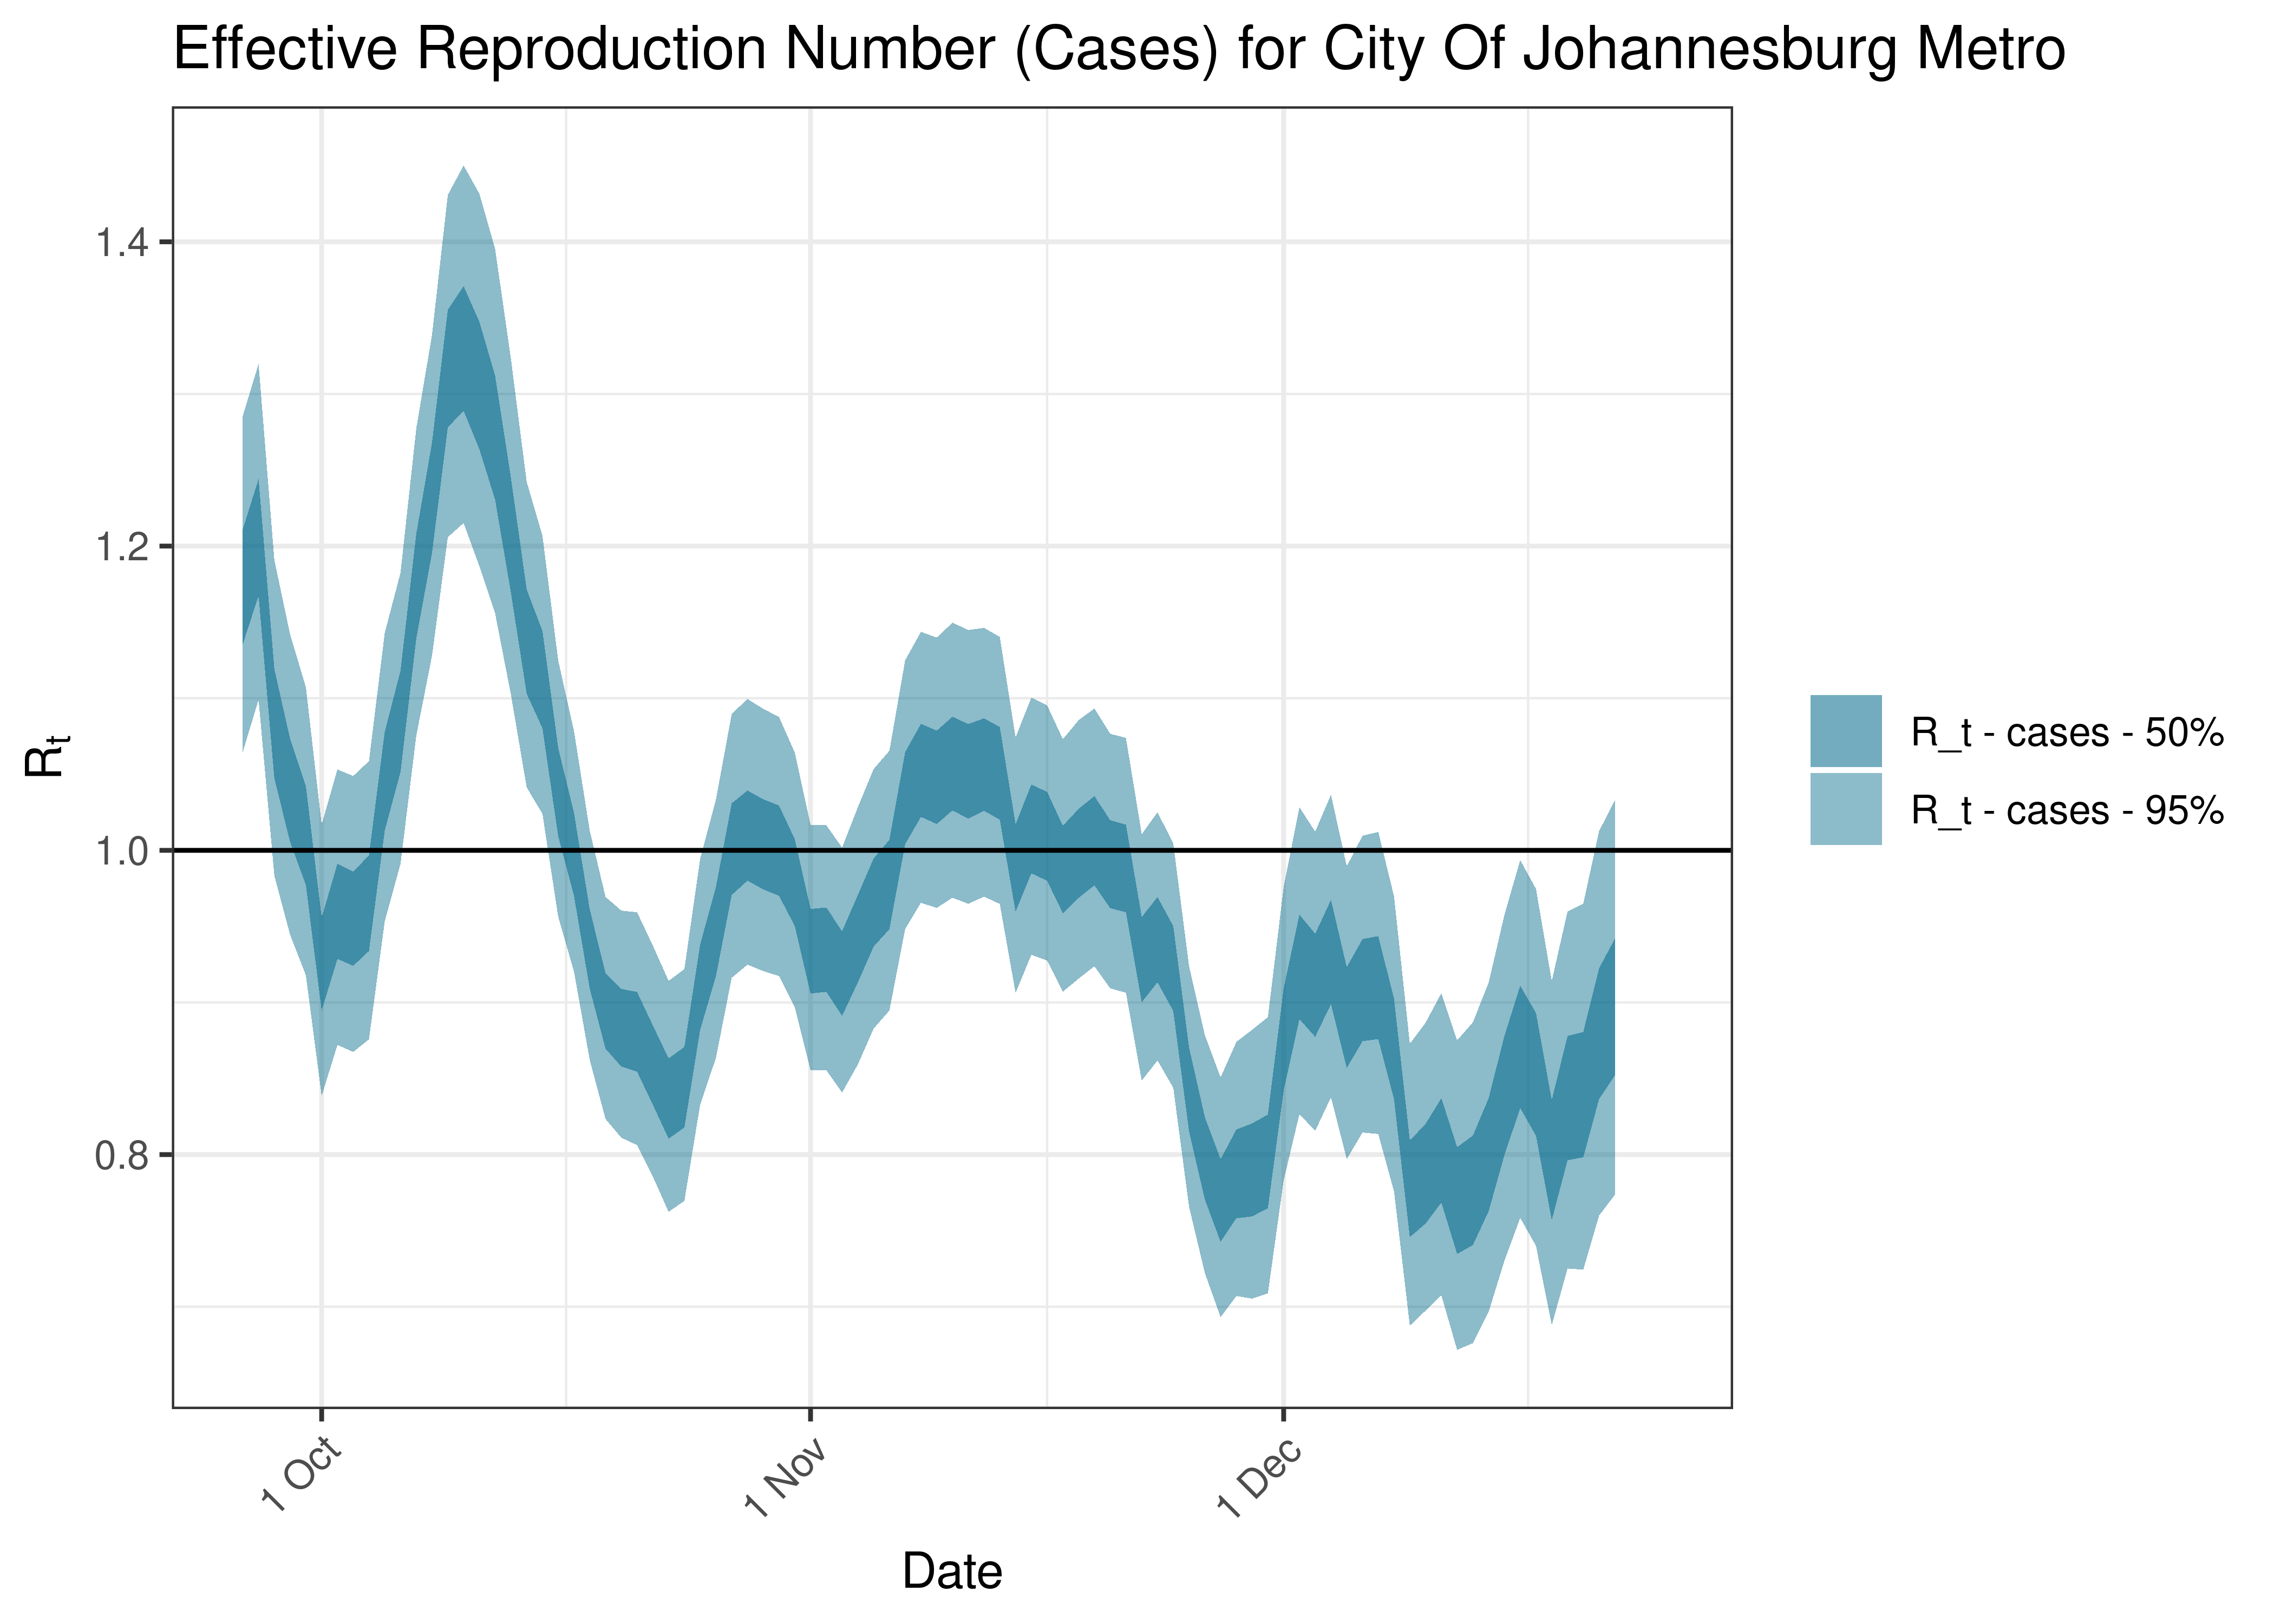 Estimated Effective Reproduction Number Based on Cases for City Of Johannesburg Metro over last 90 days